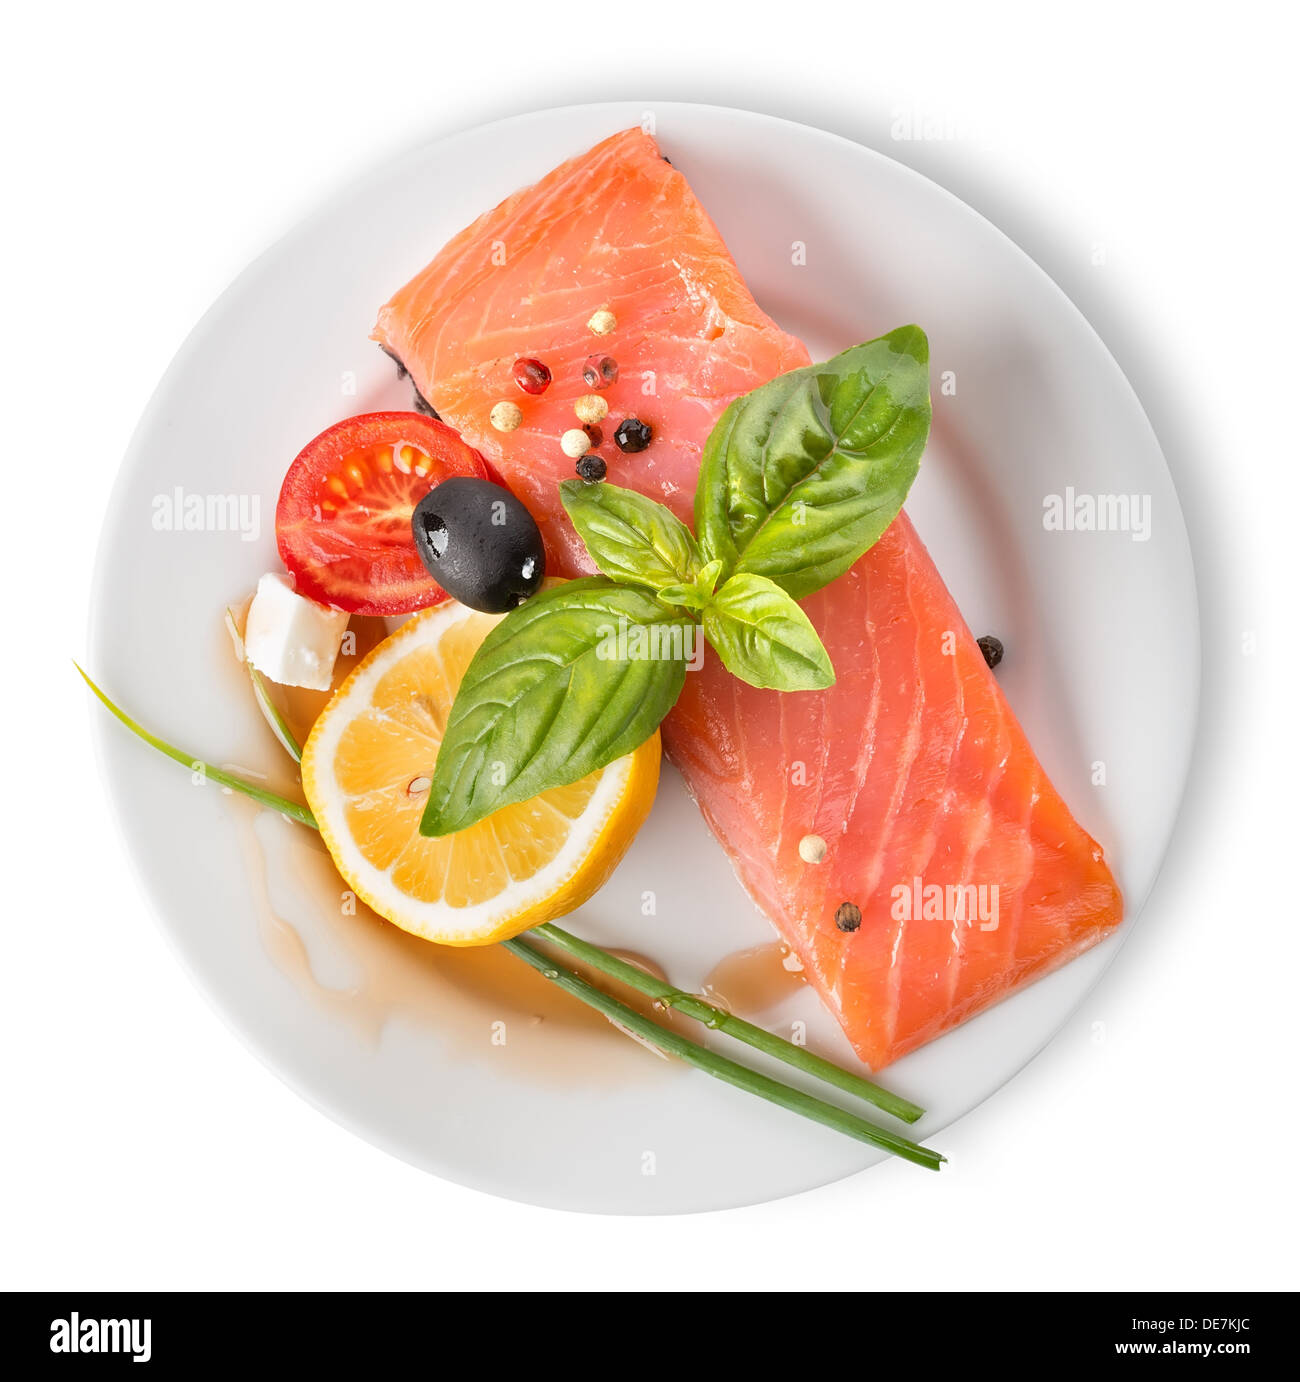 Red fish fillet with vegetables in plate isolated on white Stock Photo